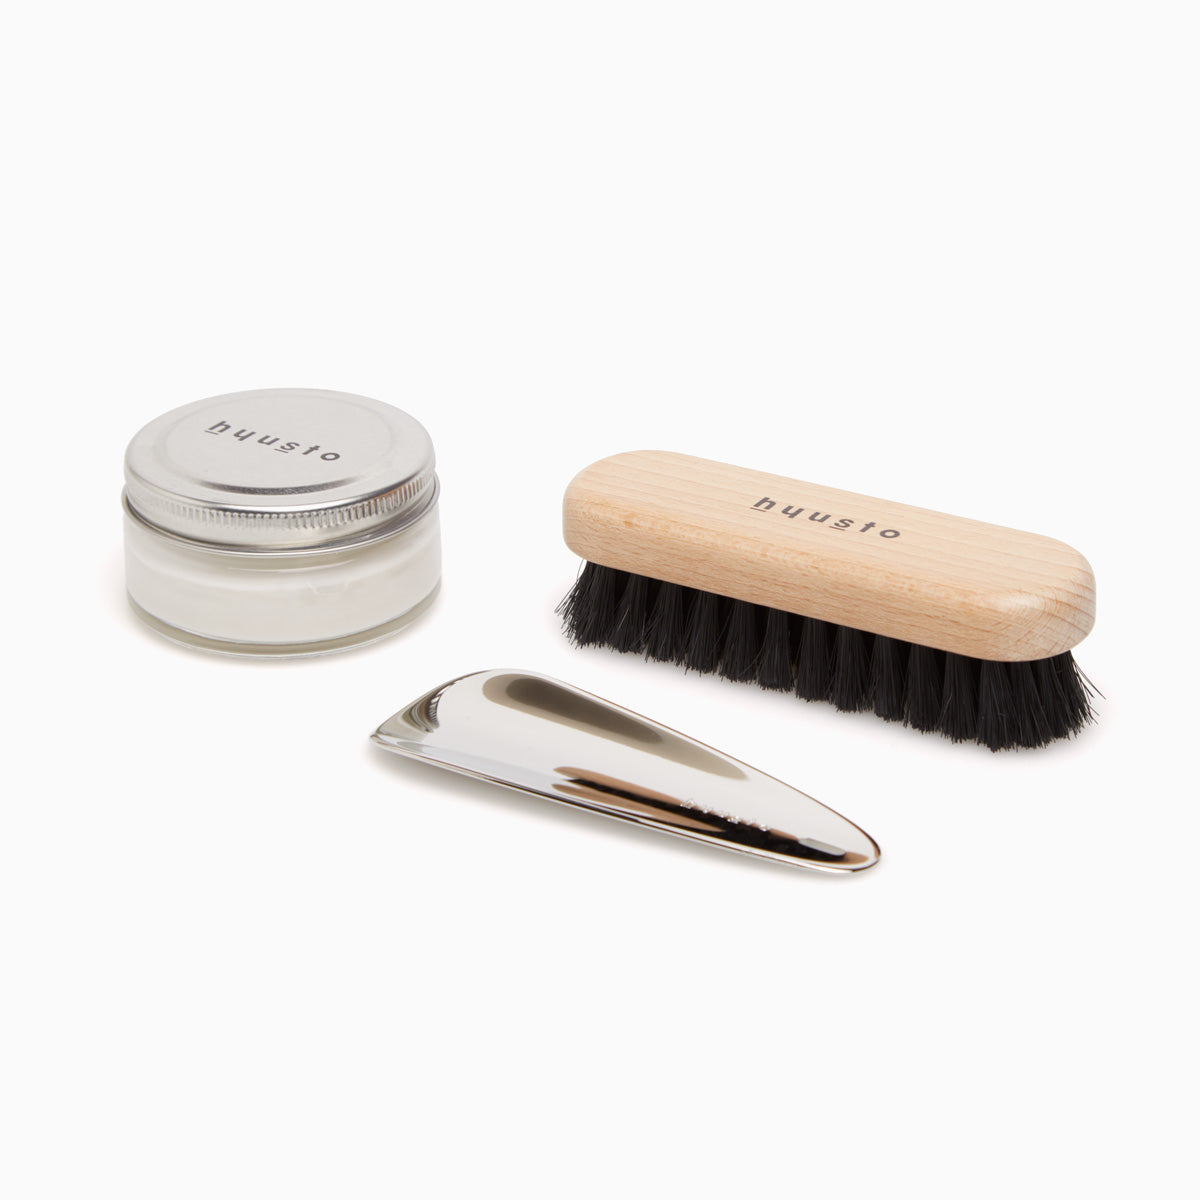 Hyusto Maintenance and care set with silver shoe horn, brush and neutro shoe cream